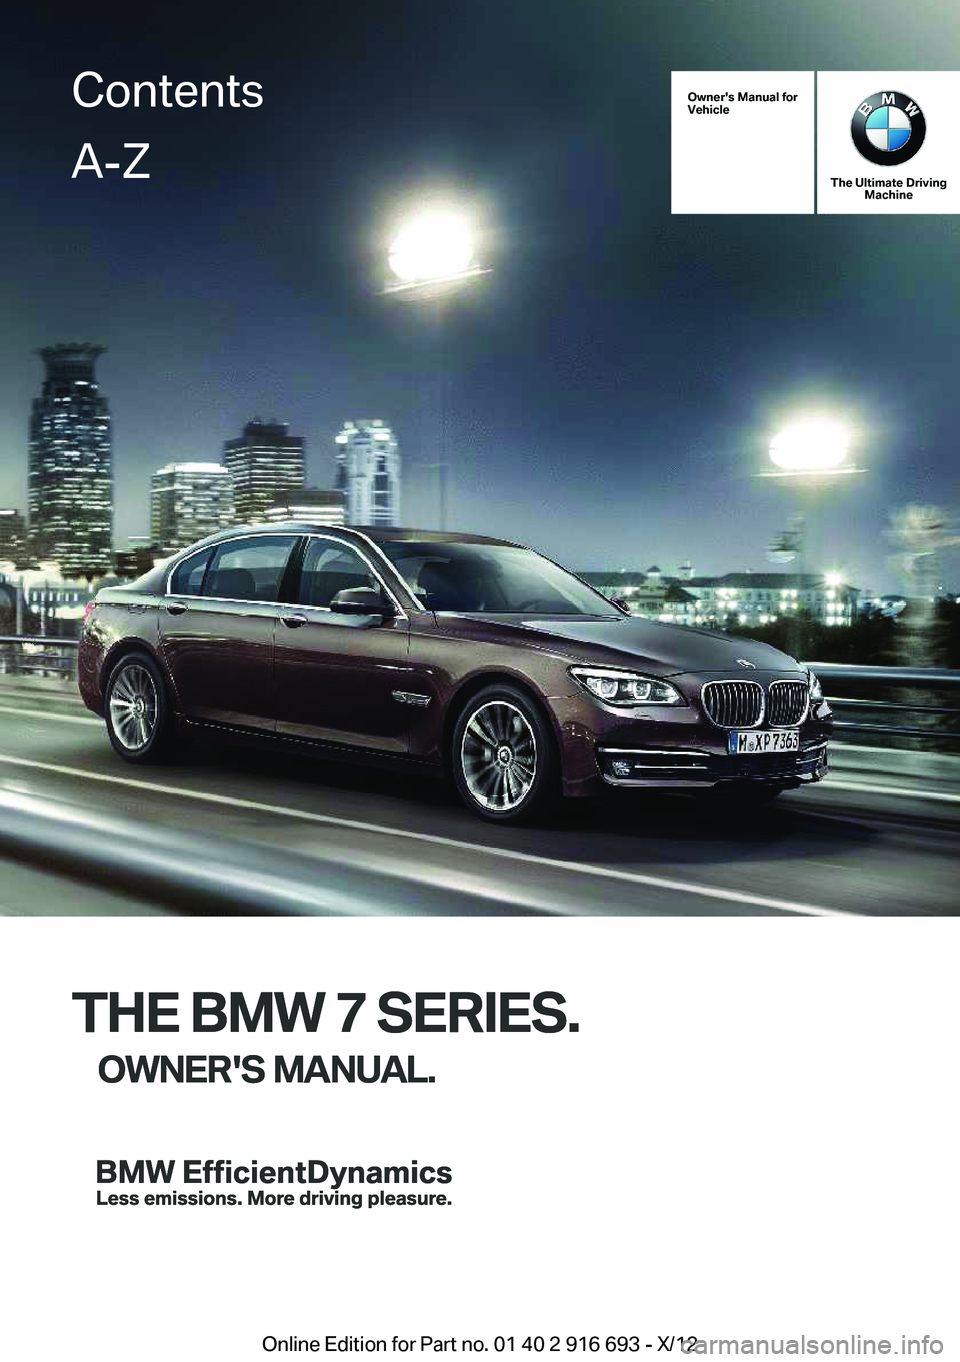 BMW 760LI 2013  Owners Manual Owner's Manual for
Vehicle
THE BMW 7 SERIES.
OWNER'S MANUAL.
The Ultimate Driving Machine
THE BMW 7 SERIES.
OWNER'S MANUAL.
ContentsA-Z
Online Edition for Part no. 01 40 2 916 693 - X/12  